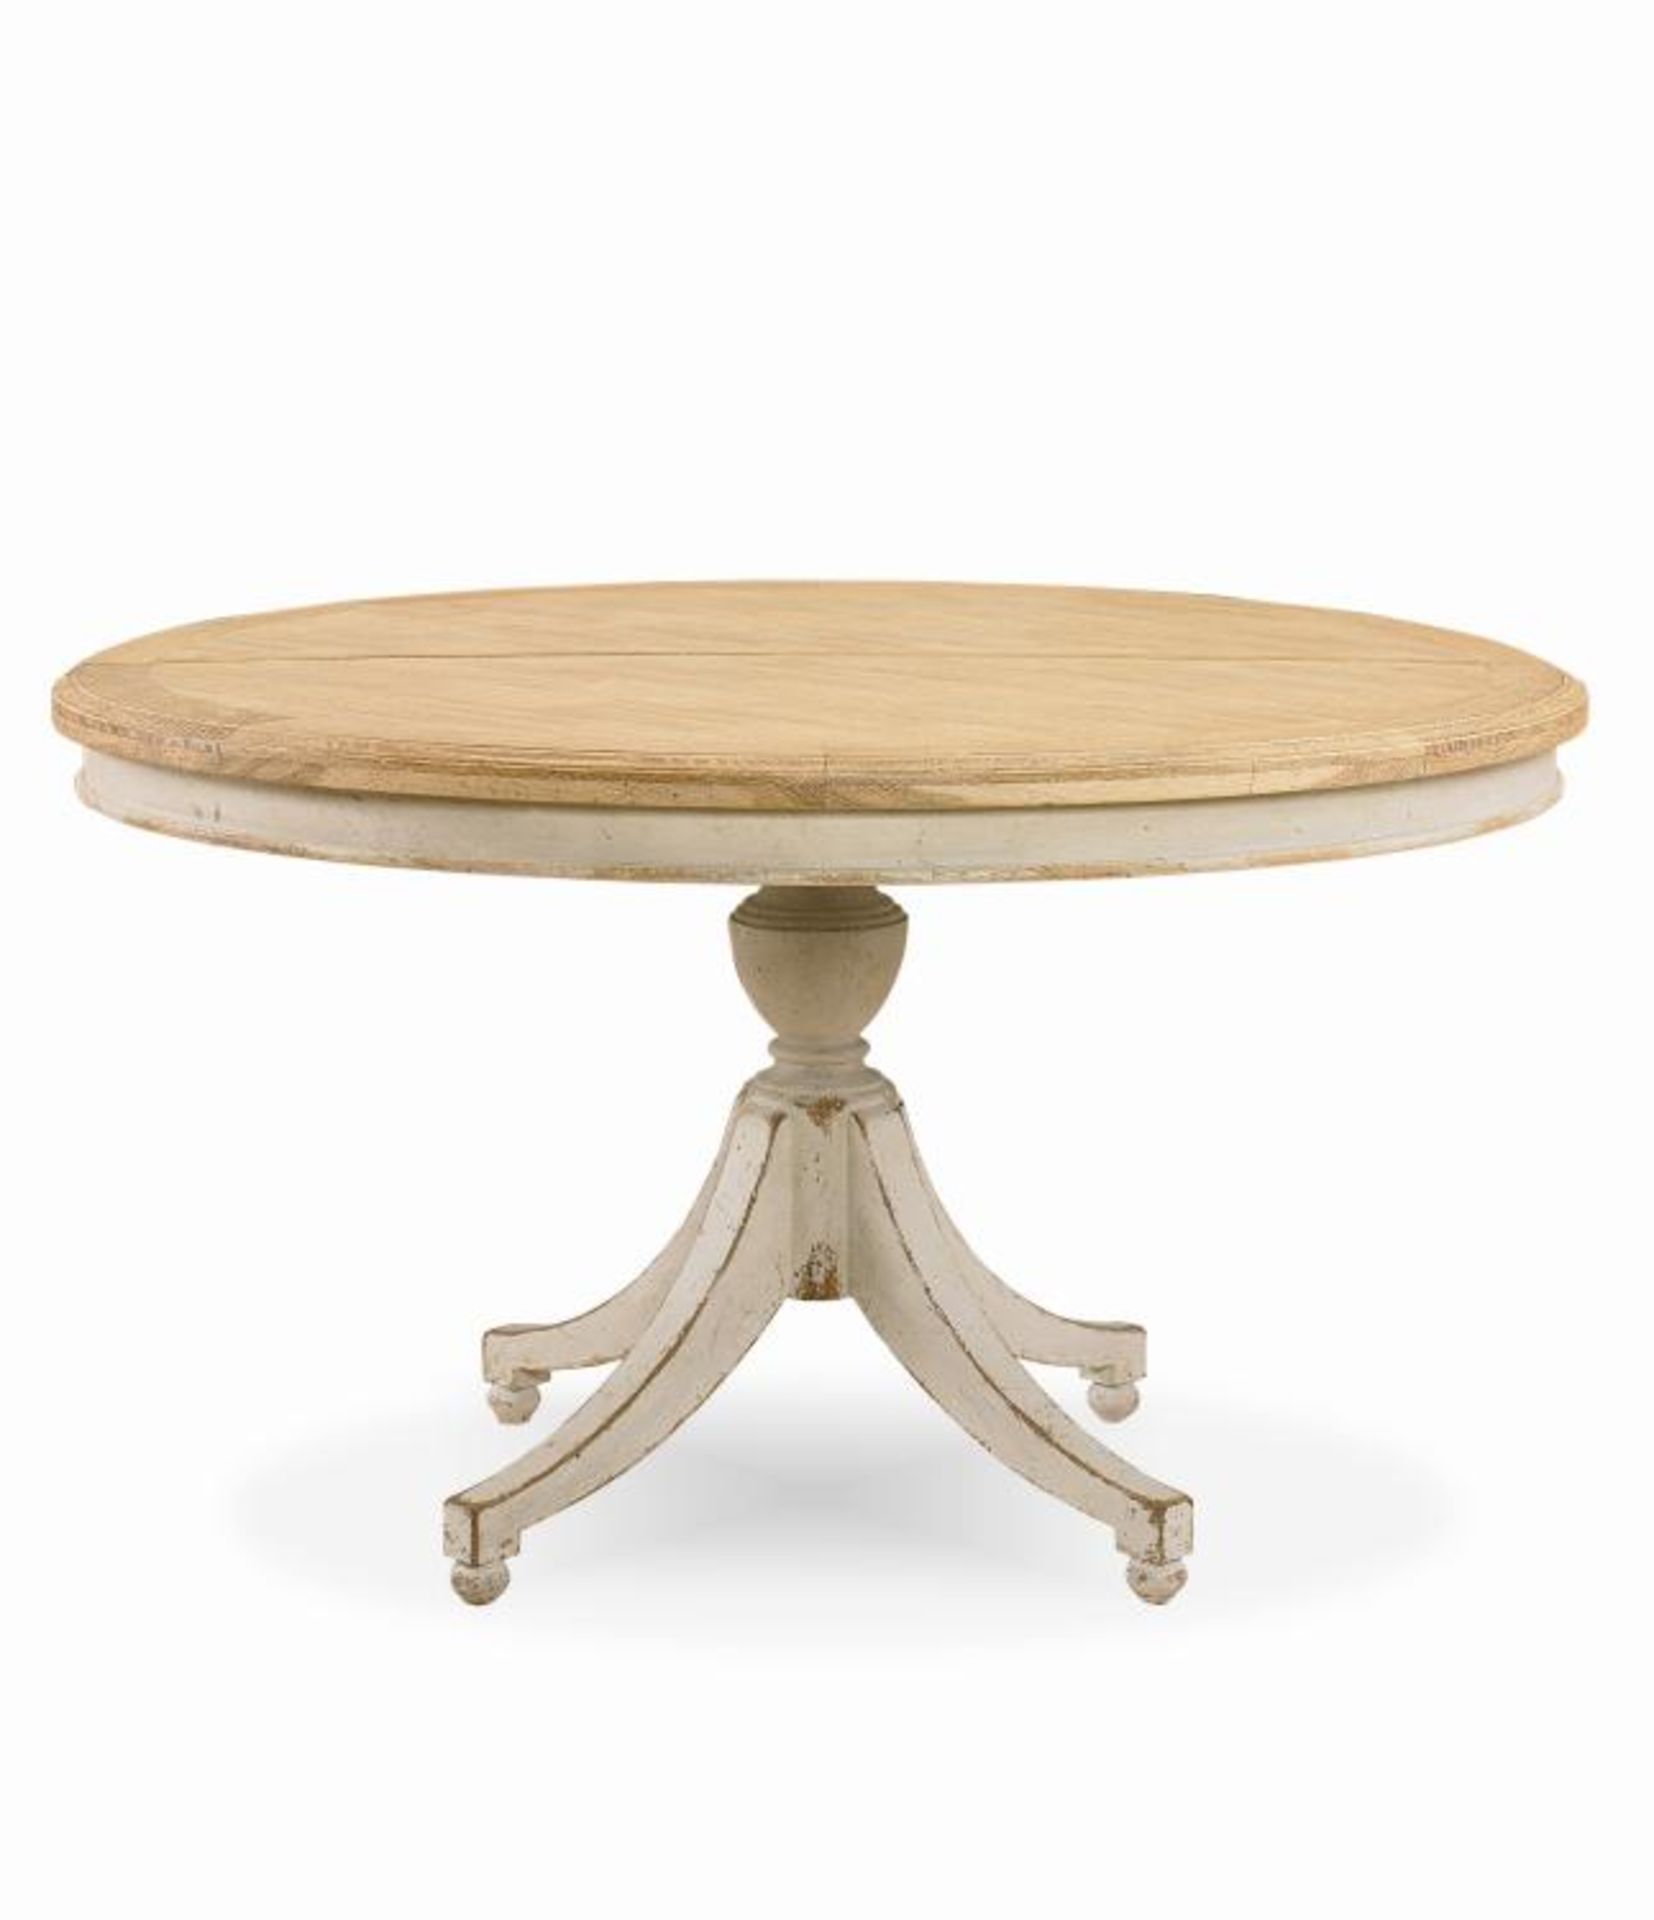 Madeline Single Pedestal Table The Base Finished In A Neutral Swedish Worn Grey Paint And The Oak